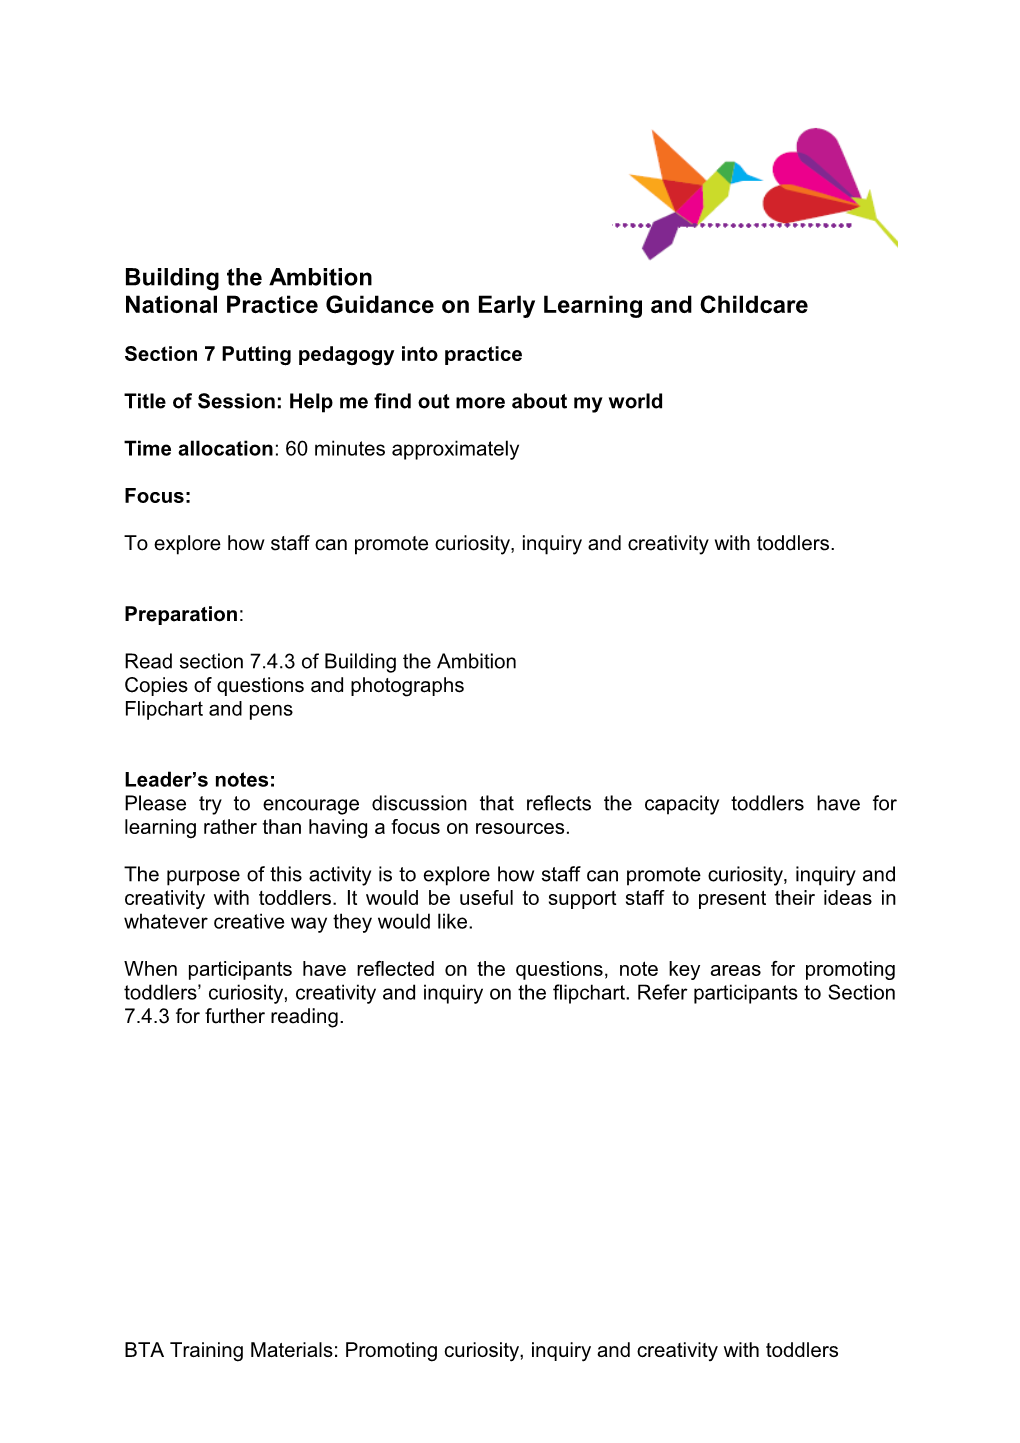 Building the Ambition - Activities: Promoting Curiosity, Inquiry and Creativity with Toddlers